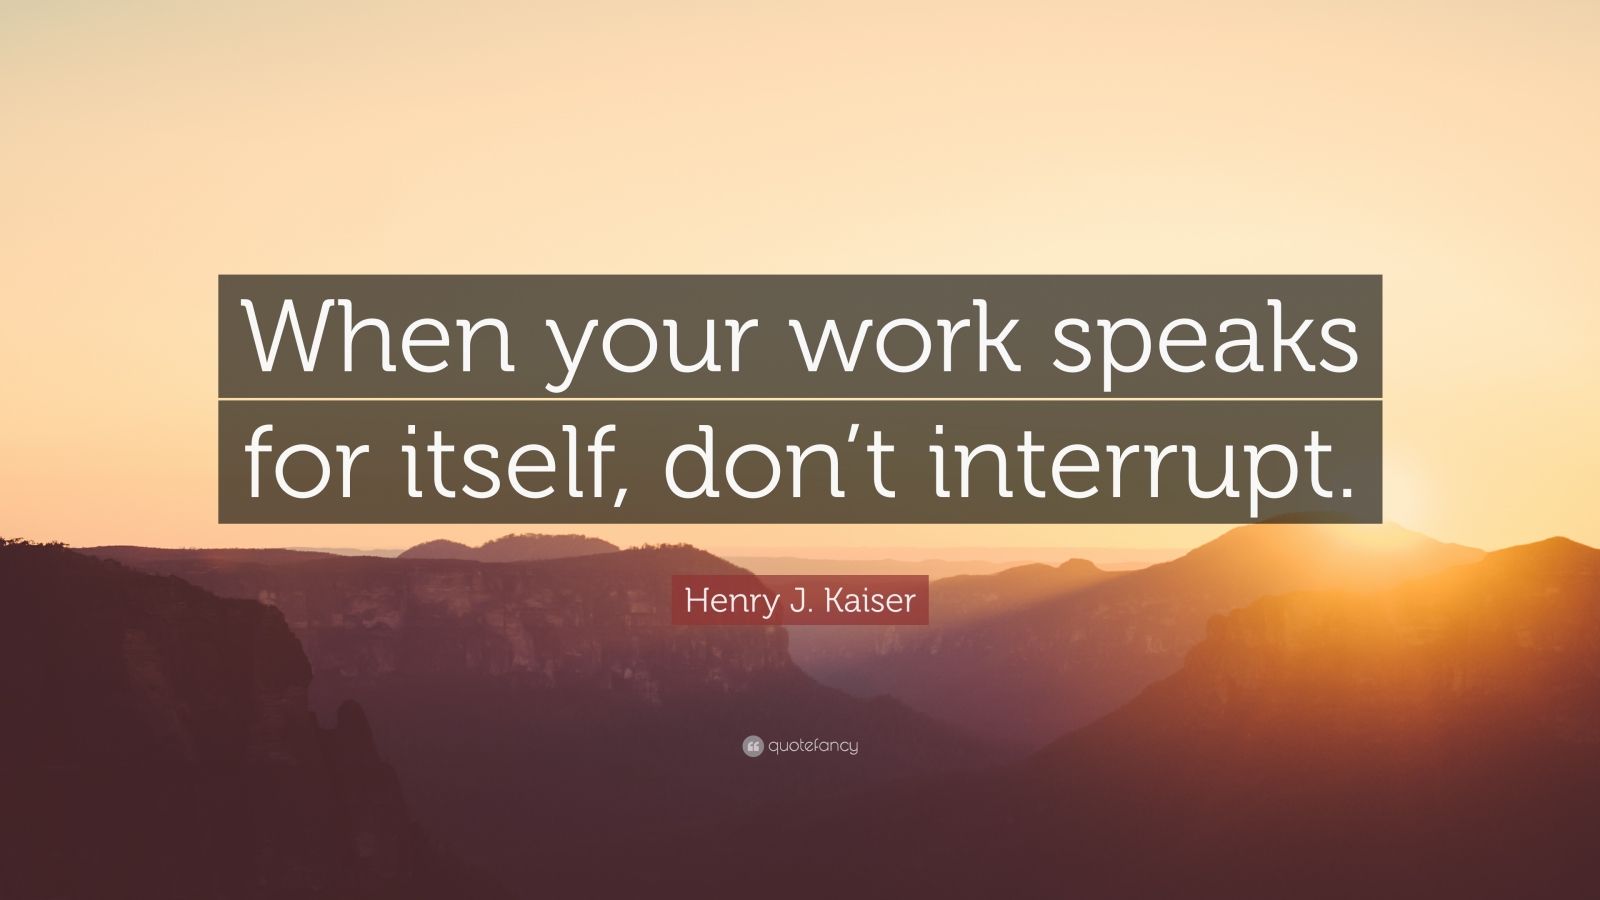 Henry J. Kaiser Quote: “When your work speaks for itself, don’t